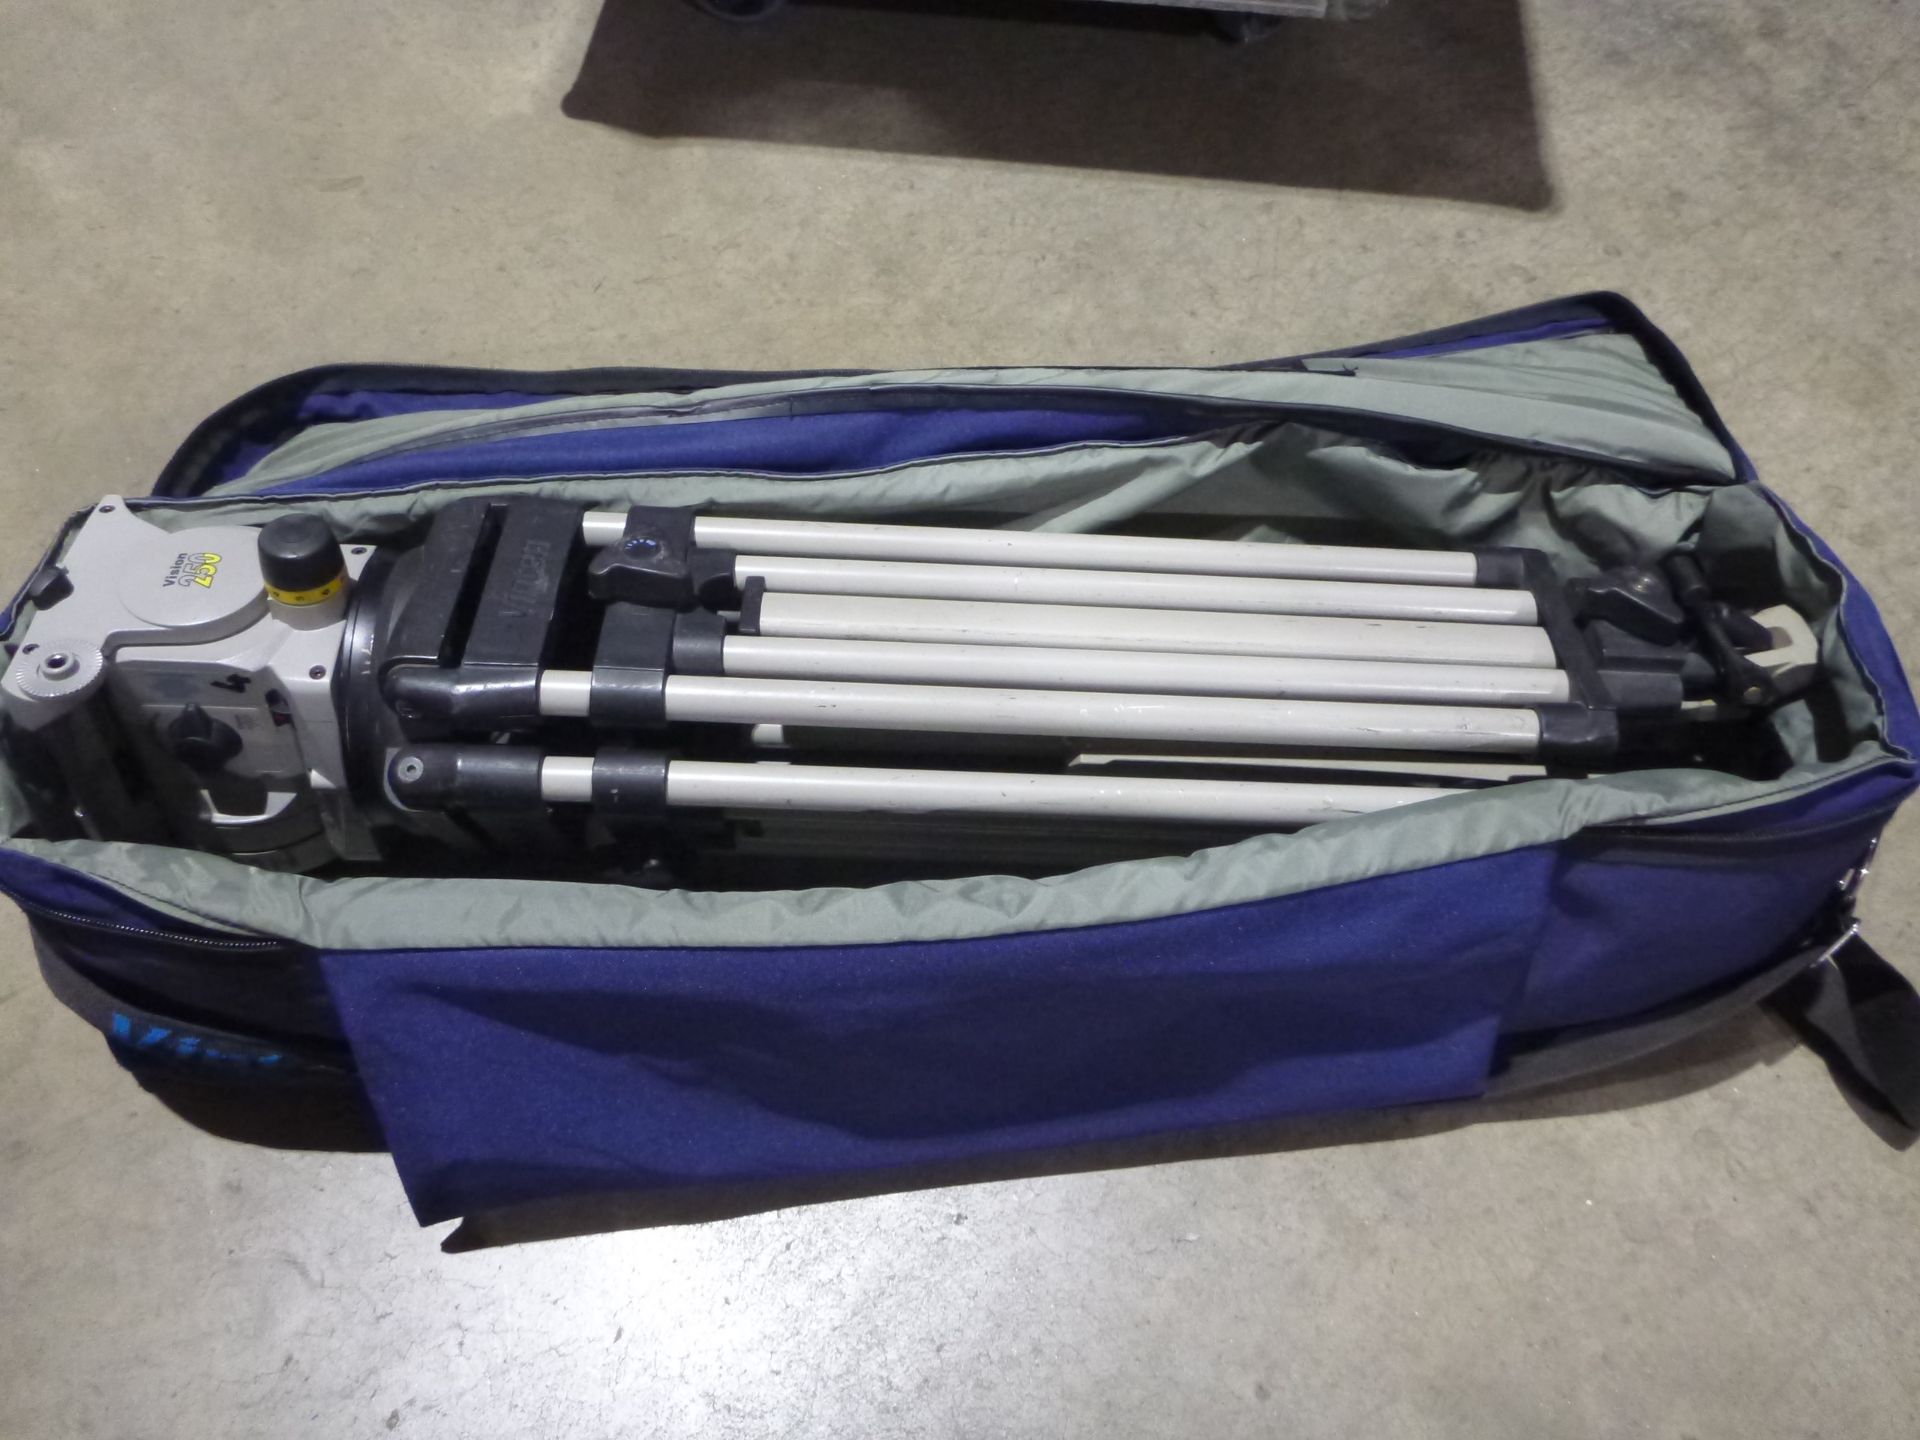 Vinton Camera Tripod, Model Vision 250, In carry case - Image 3 of 4